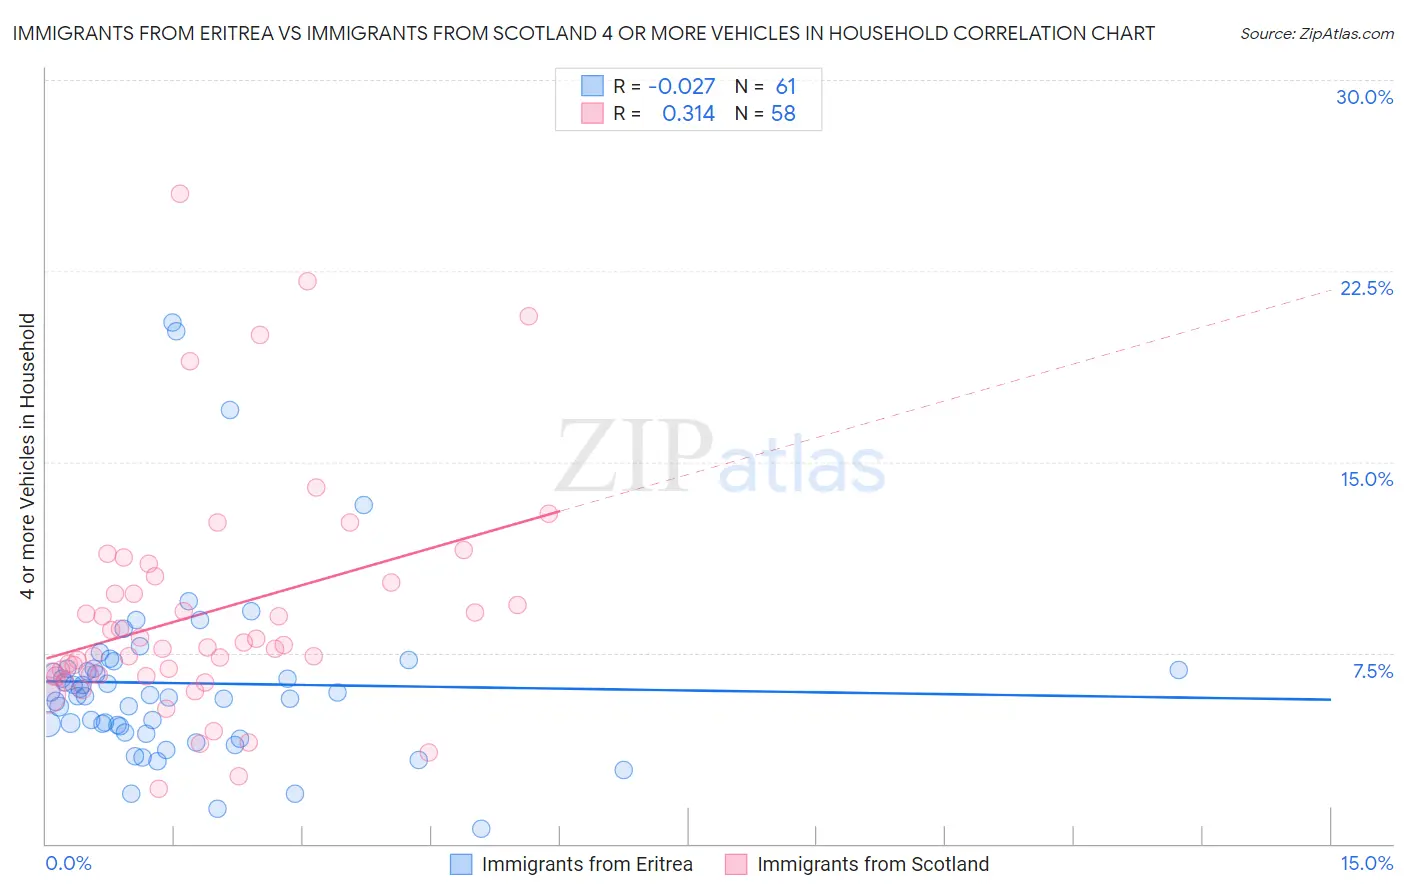 Immigrants from Eritrea vs Immigrants from Scotland 4 or more Vehicles in Household